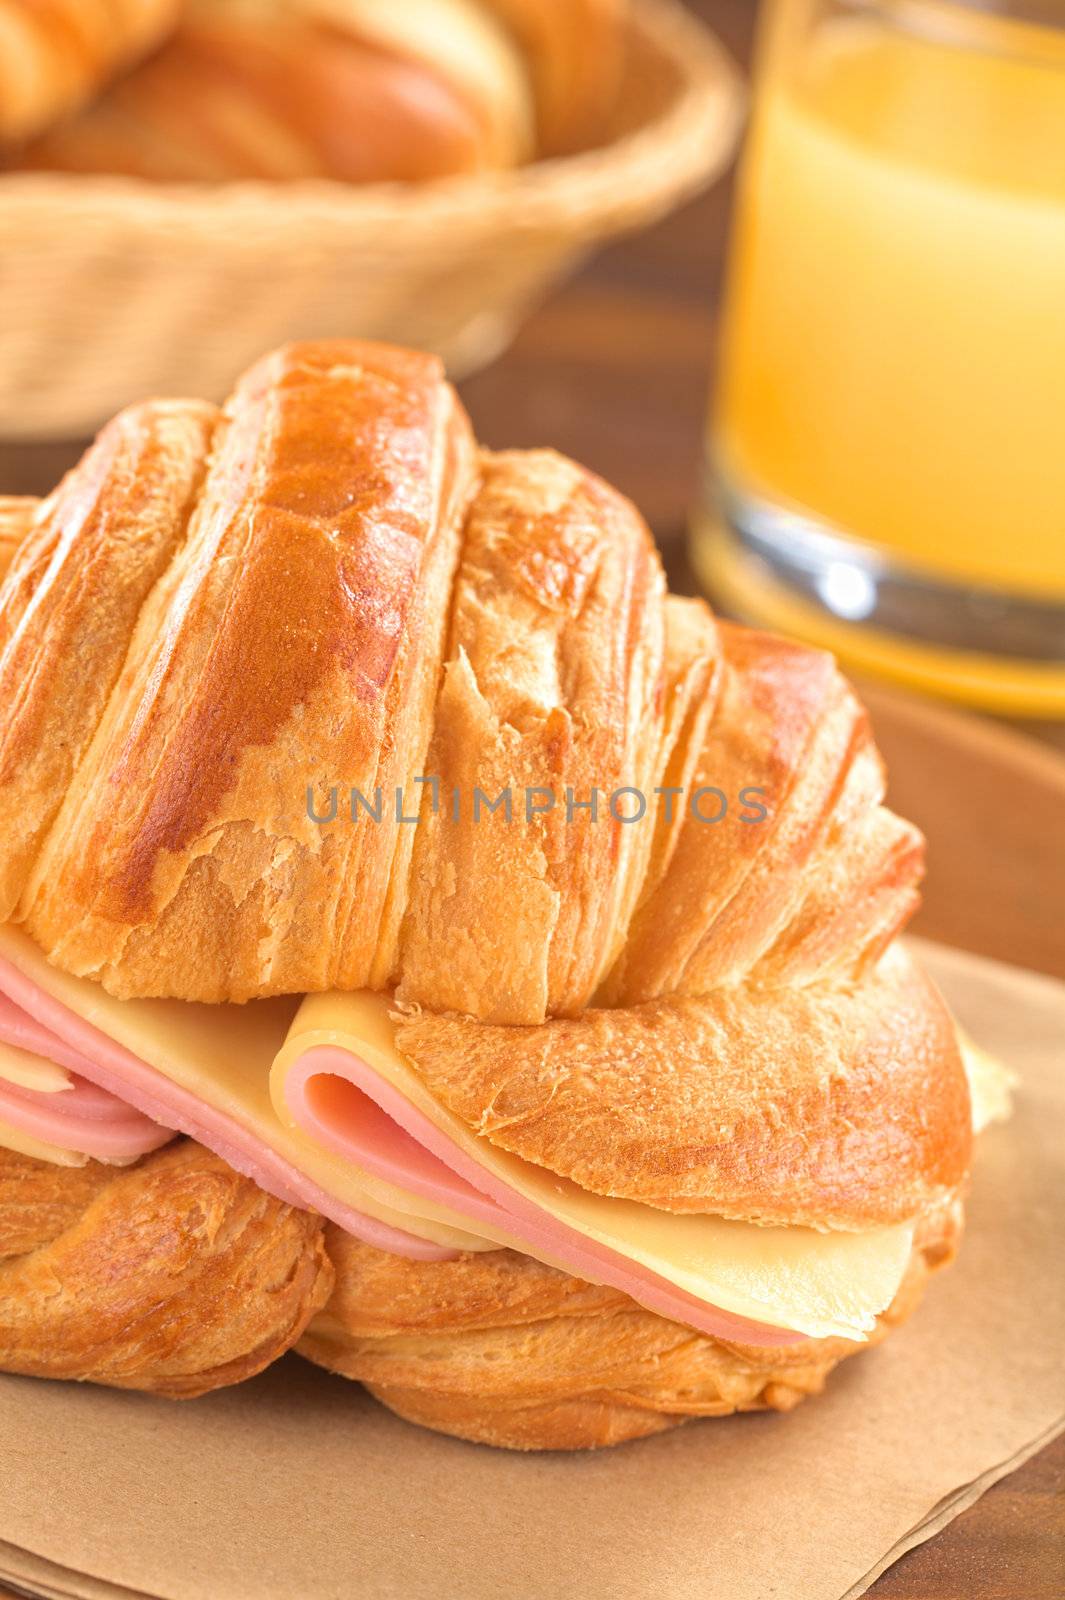 Croissant with Ham and Cheese by ildi